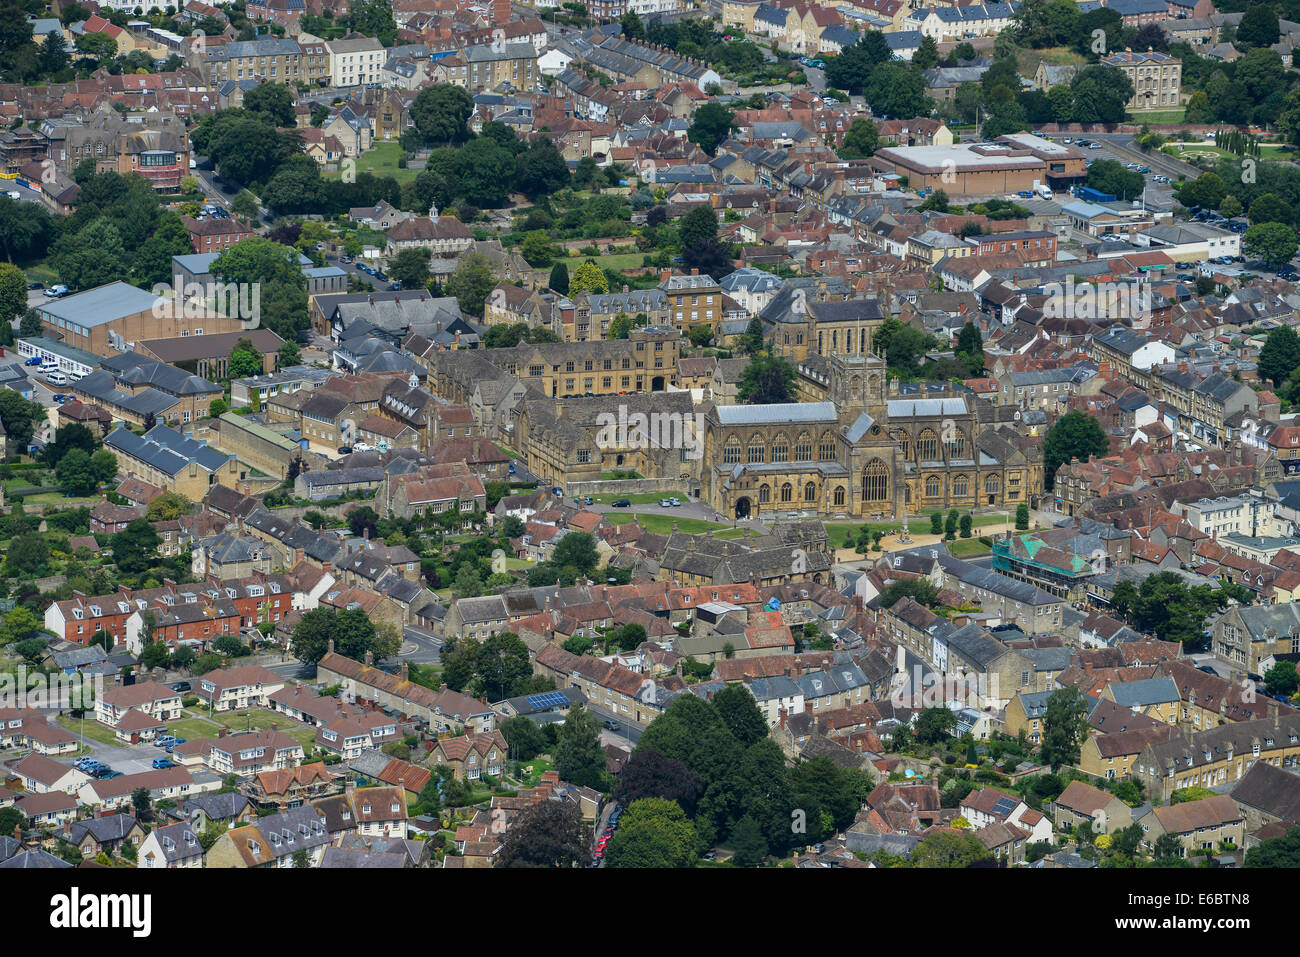 An aerial view showing Sherborne Abbey and the immediate surroundings. Dorset, United Kingdom Stock Photo